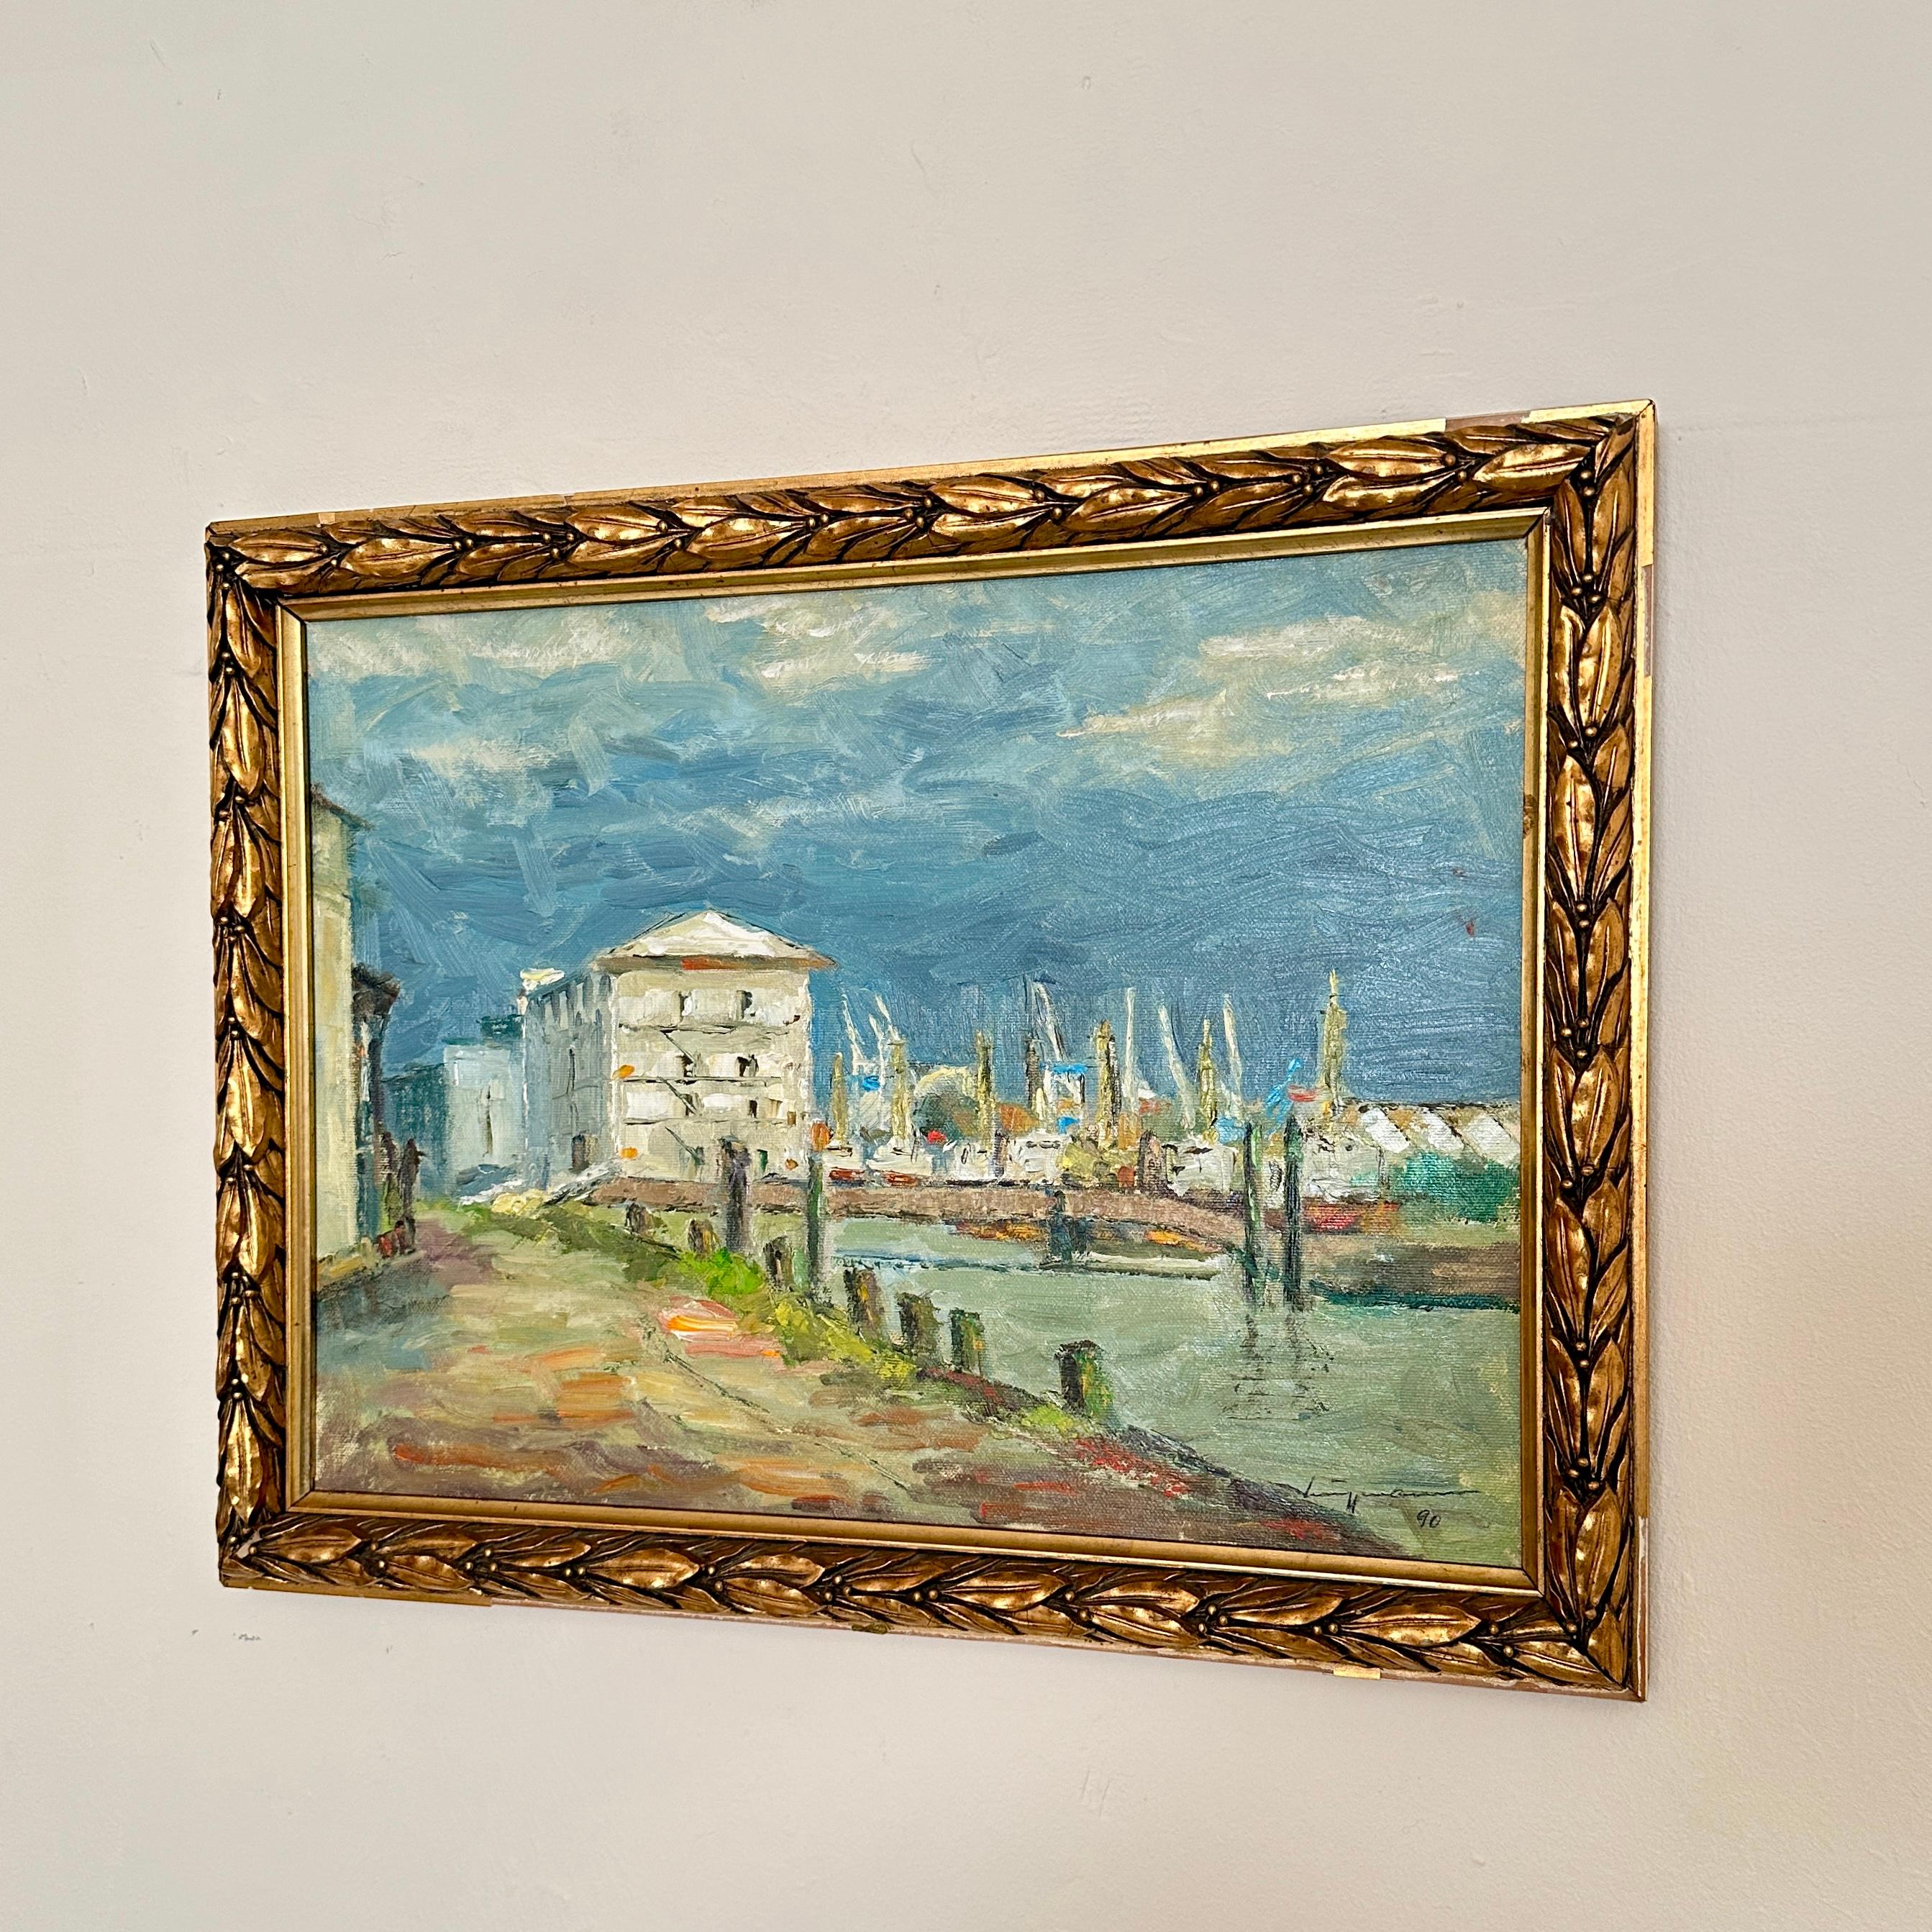 This beautiful Oil Landscape Painting in Gilded Frame was painted around 1990.
A unique piece which is a great eye-catcher for your antique, modern, space age or mid-century interior.
If you have any more questions we are very happy to help and send